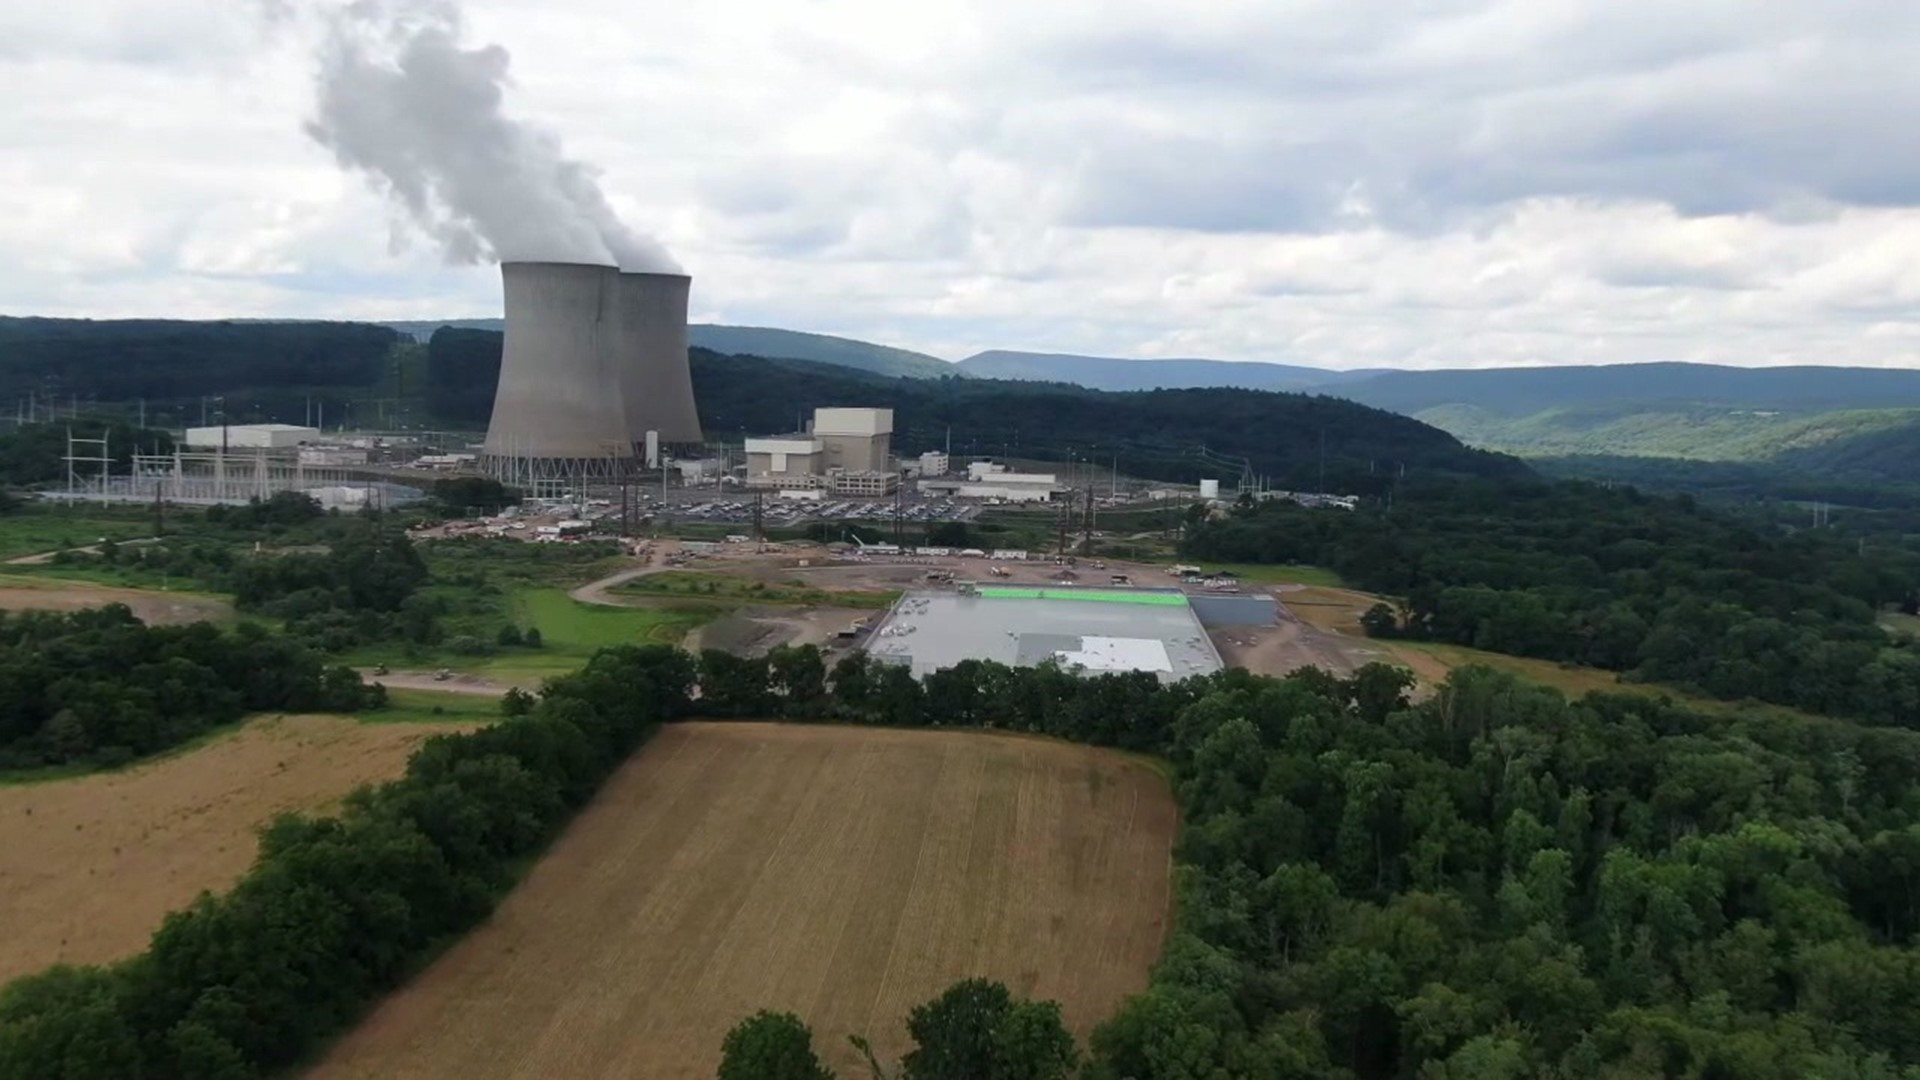 The company that owns the Susquehanna Steam Electric Station Nuclear Power Plant was building the mine next to its cooling towers.